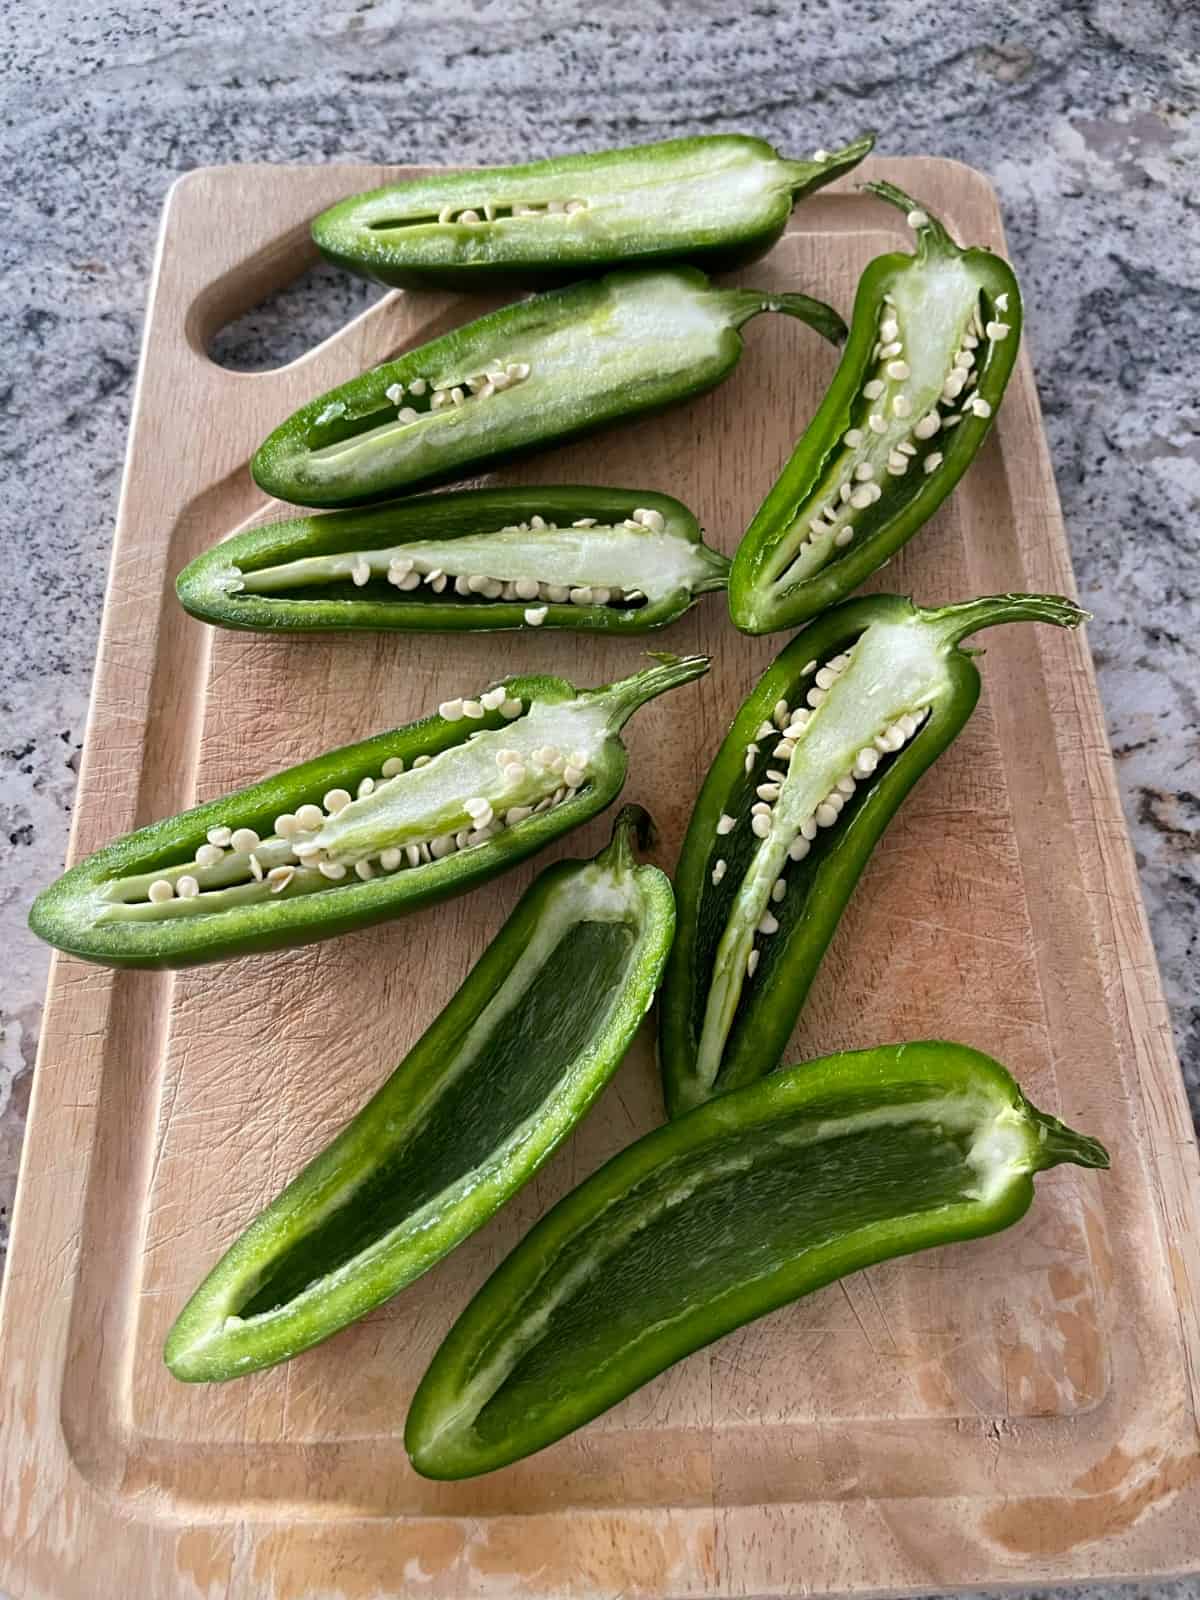 Jalapeno peppers on wood cutting board, cut in half lengthwise with ribs and seeds removed from two peppers.